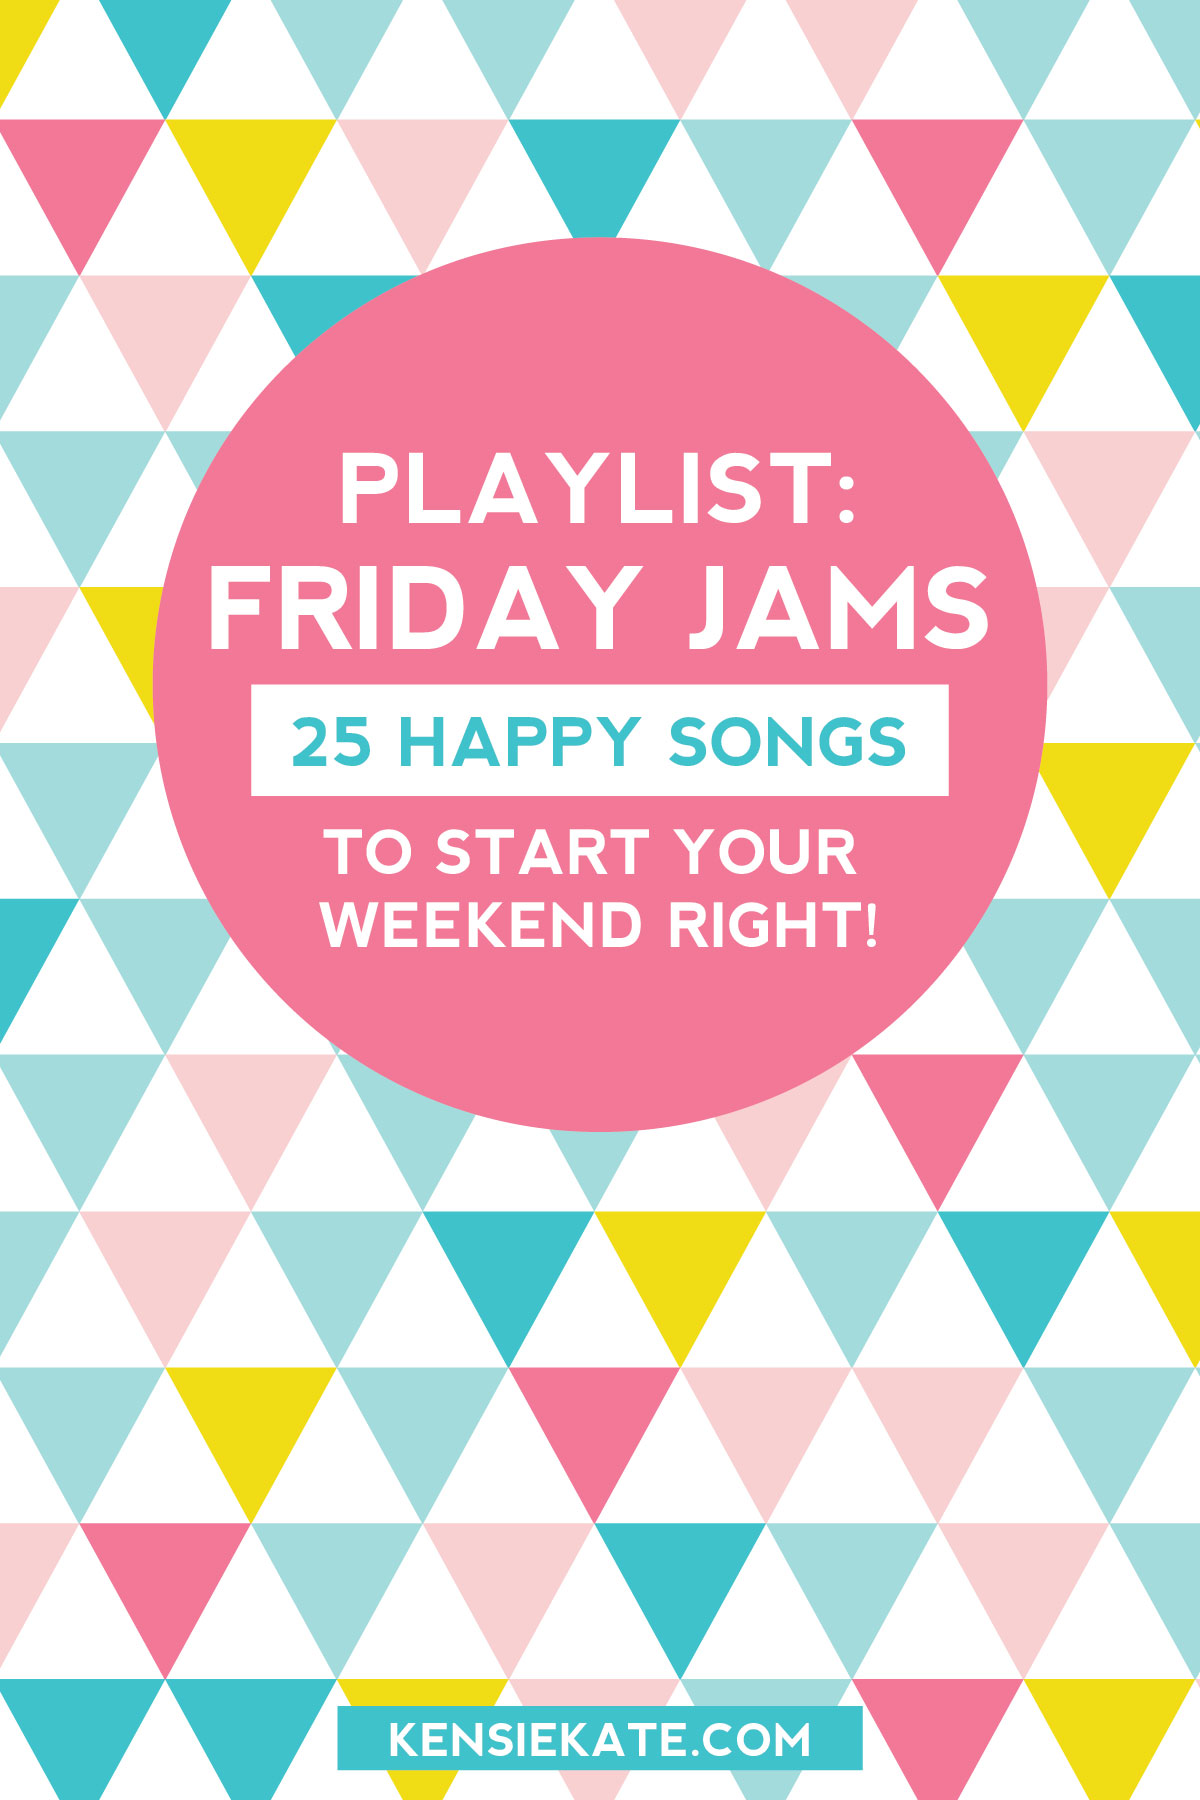 Kensie Kate | Super happy playlist perfect for the weekend!